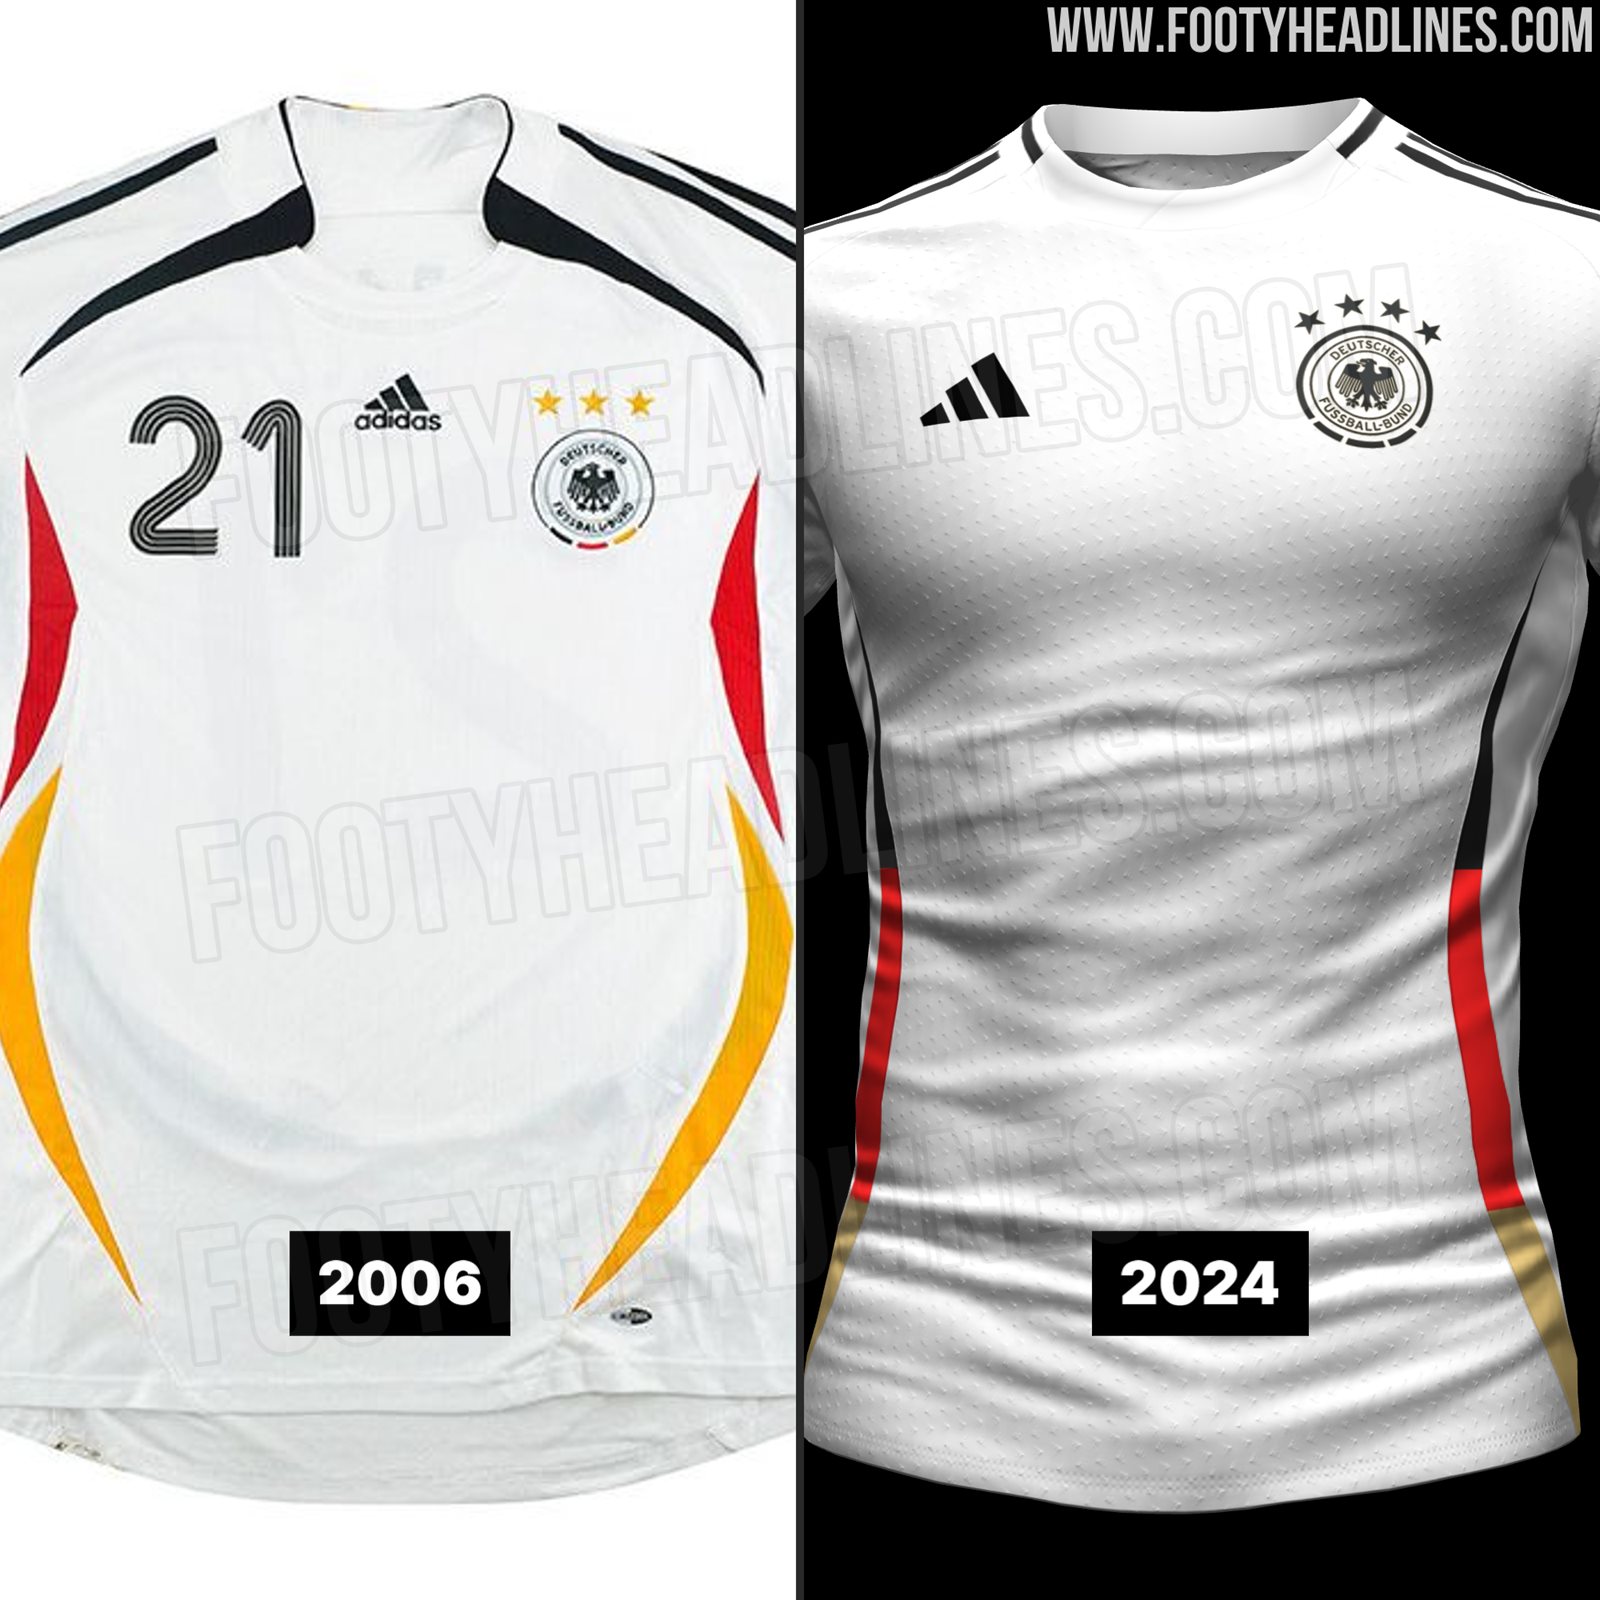 Exclusive: Germany Euro 2024 Home Kit Info Leaked - Footy Headlines